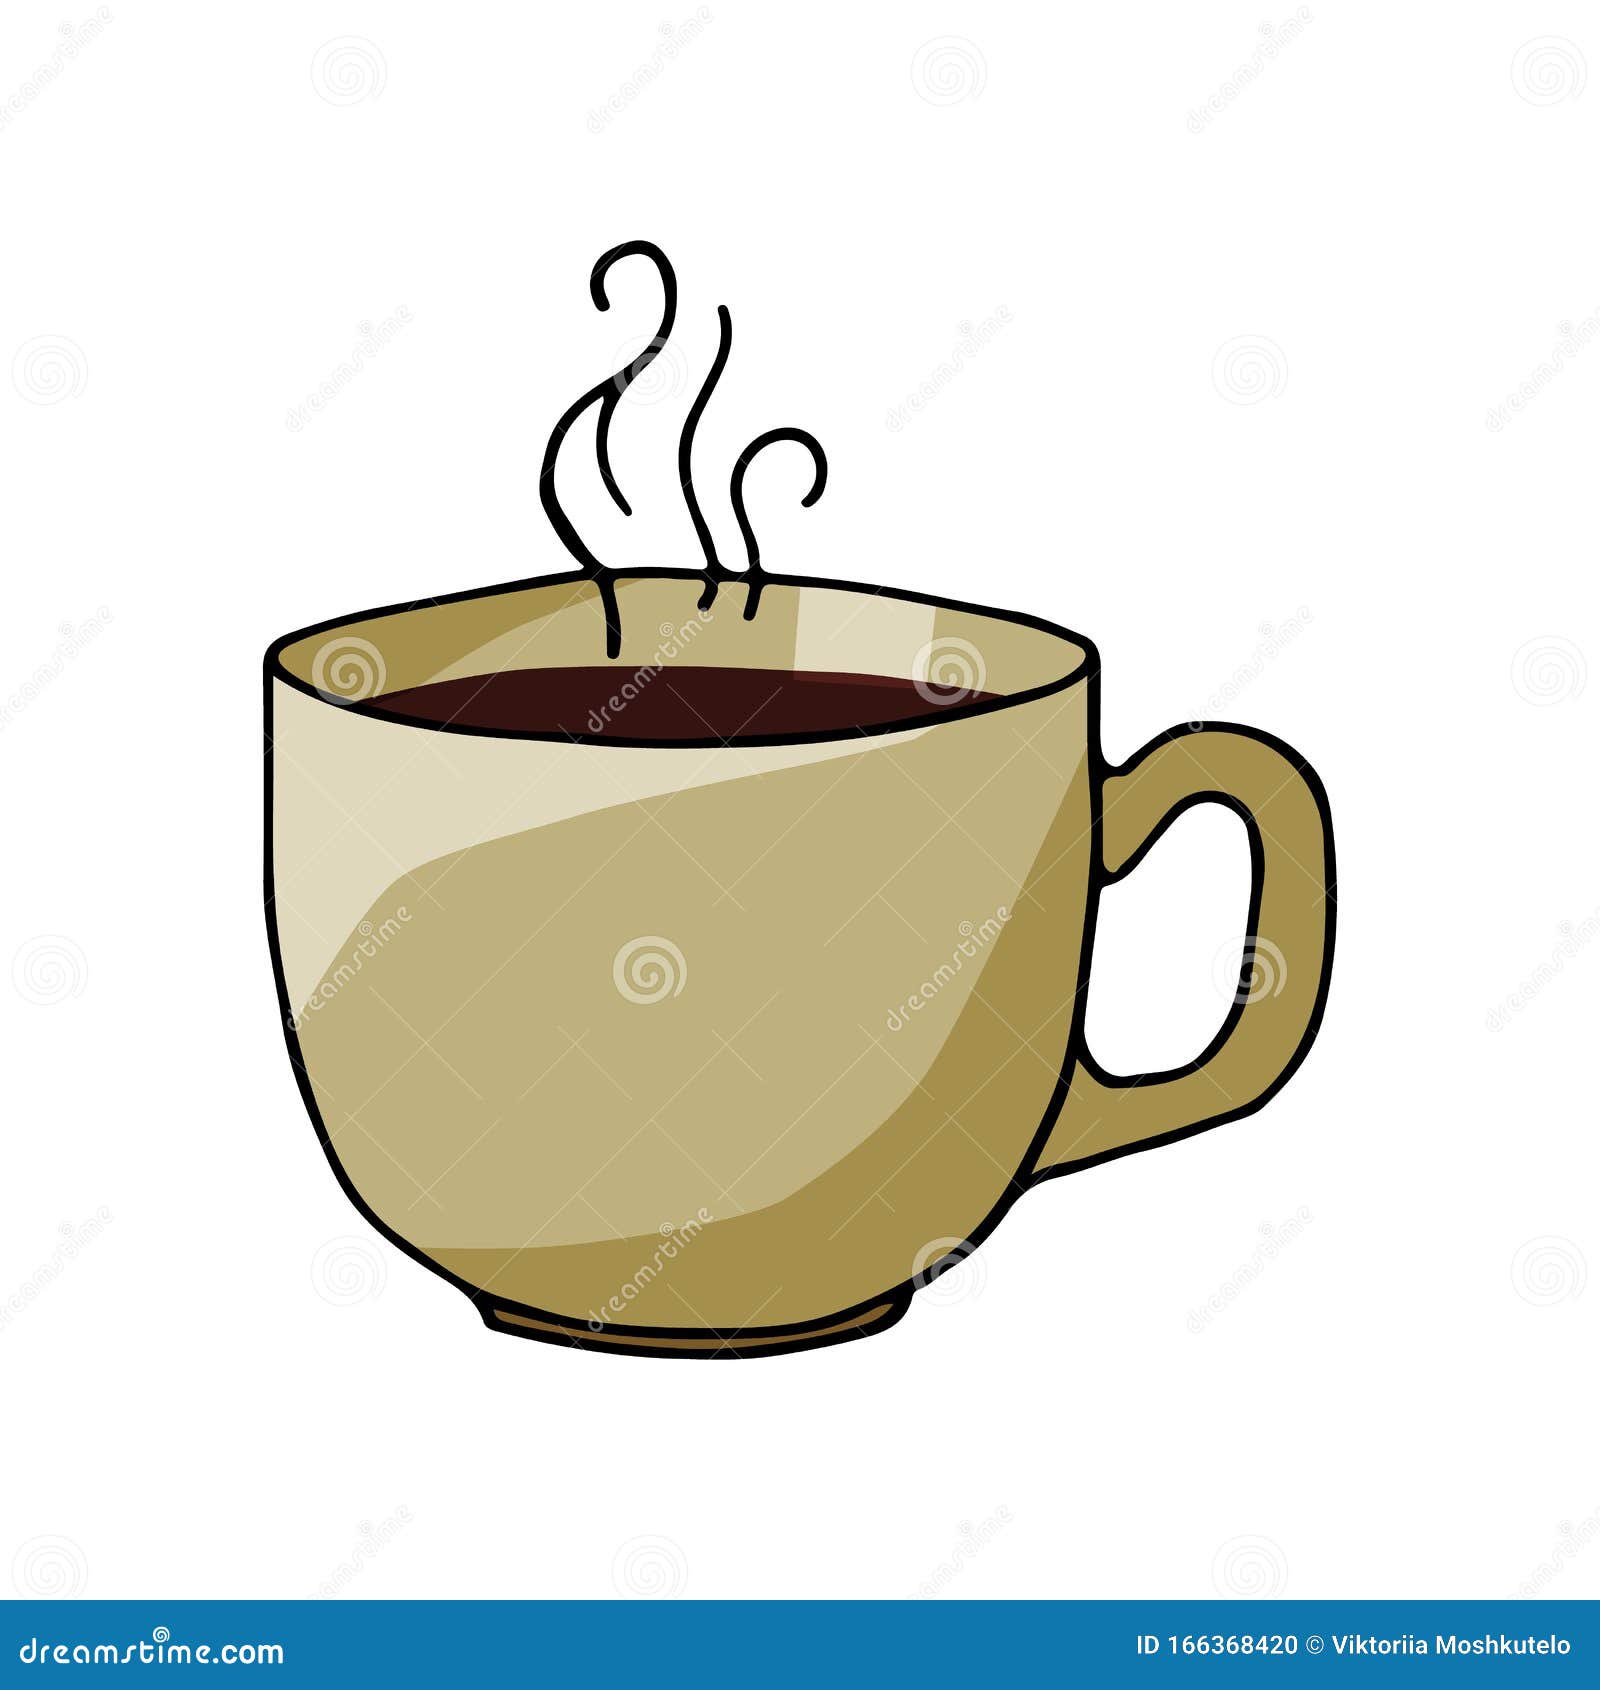 https://thumbs.dreamstime.com/z/cup-coffee-tea-hand-drawn-sketch-cup-coffee-tea-hand-drawn-sketch-isolated-white-background-166368420.jpg